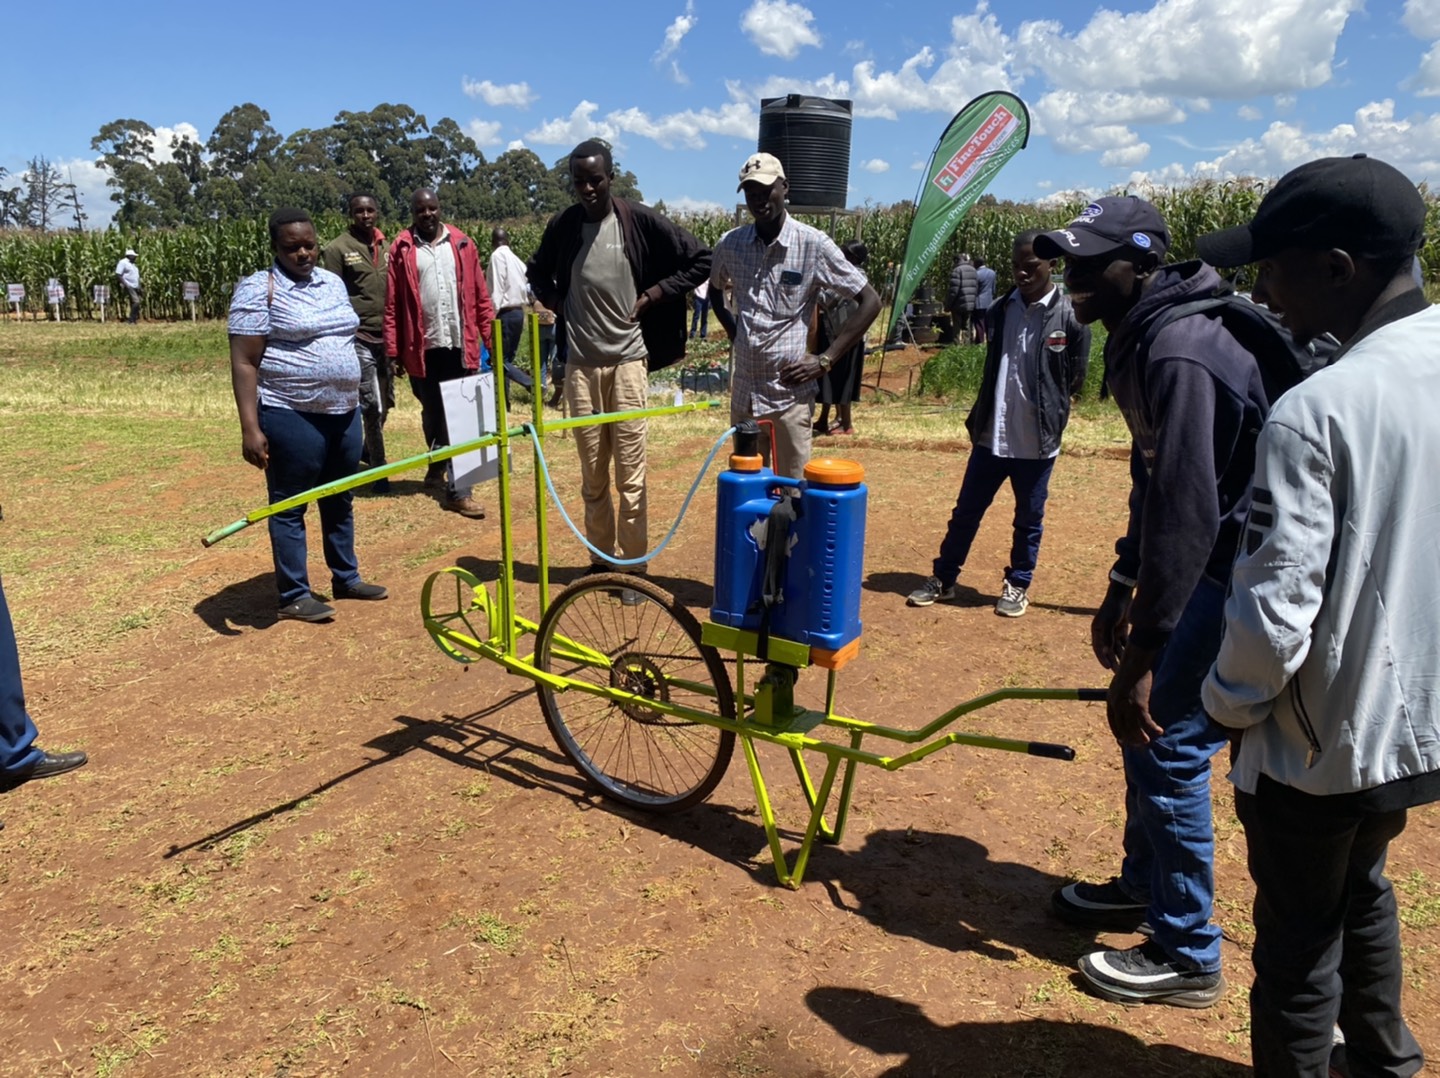 A manually operated multi nozzle sprayer. Developed by students of the University of Eldoret for small scale farmers. Photo by Basil Malaki.